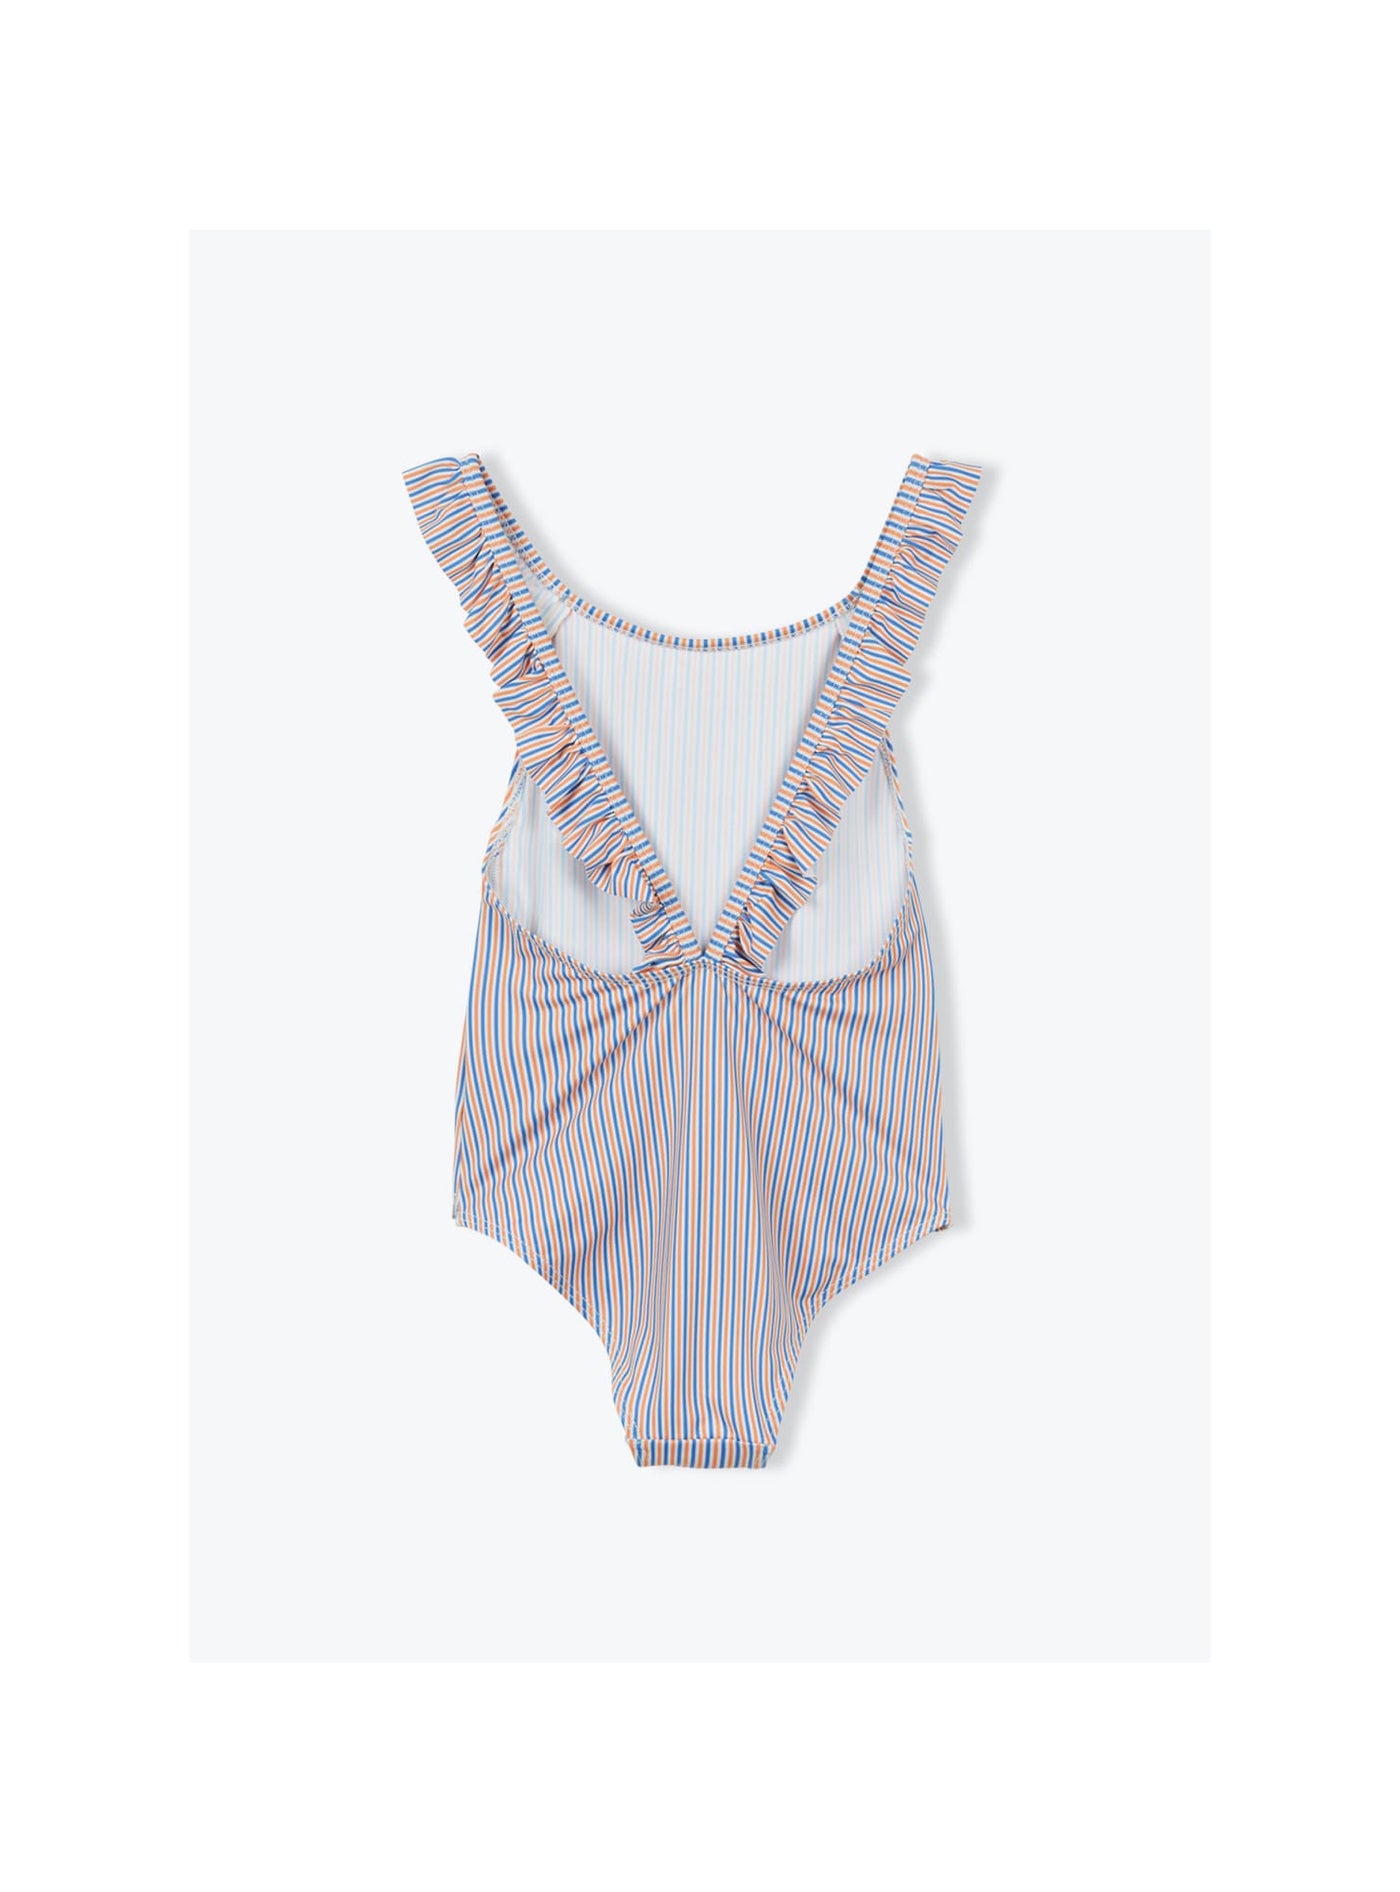 Striped Baby Swimsuit